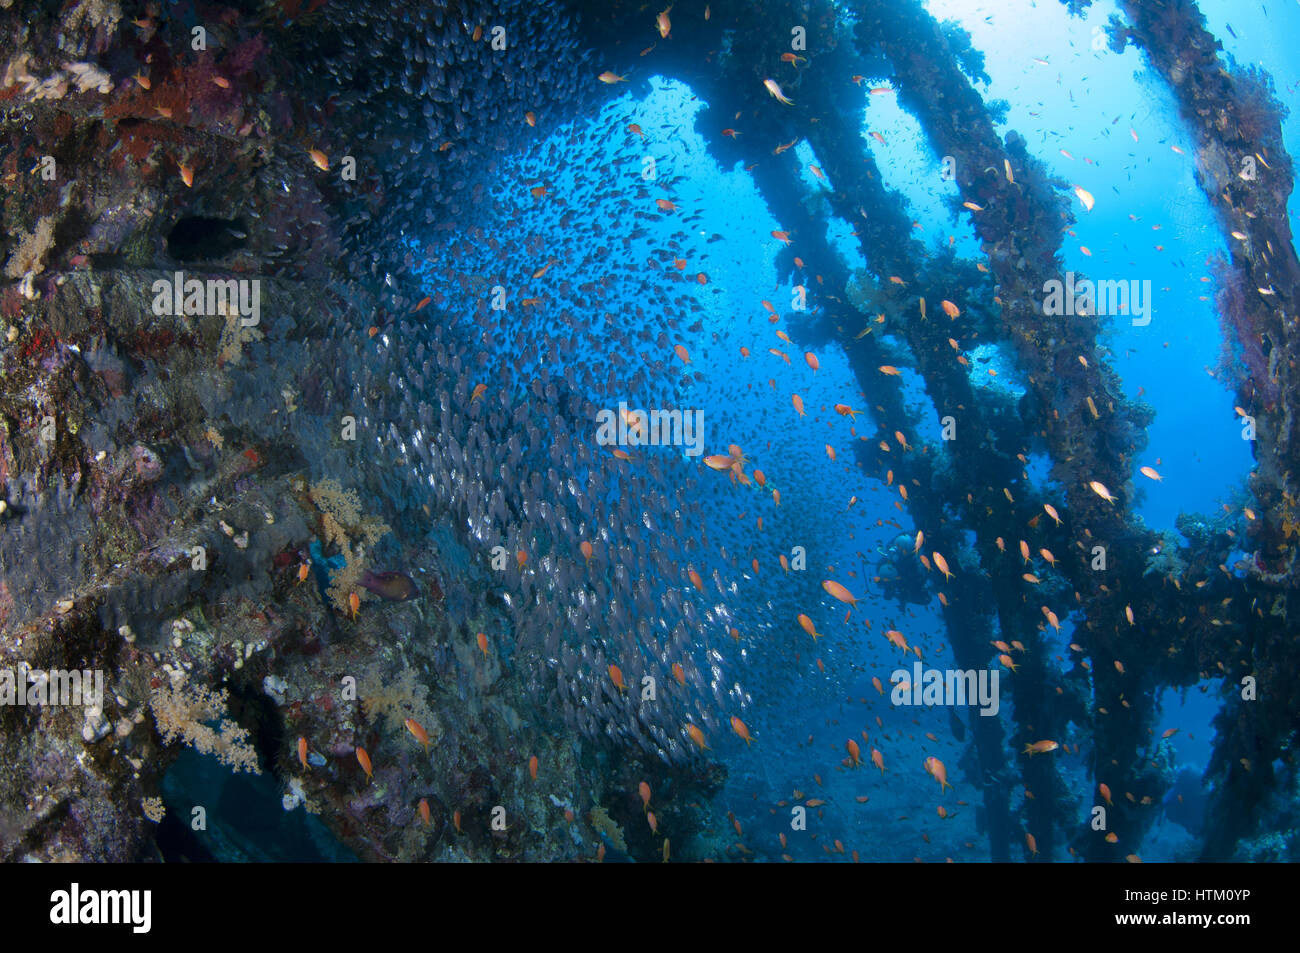 large school of fish Pigmy Sweepers (Parapriacanthus ransonneti) on shipwreck background, Red Sea, Egypt Stock Photo